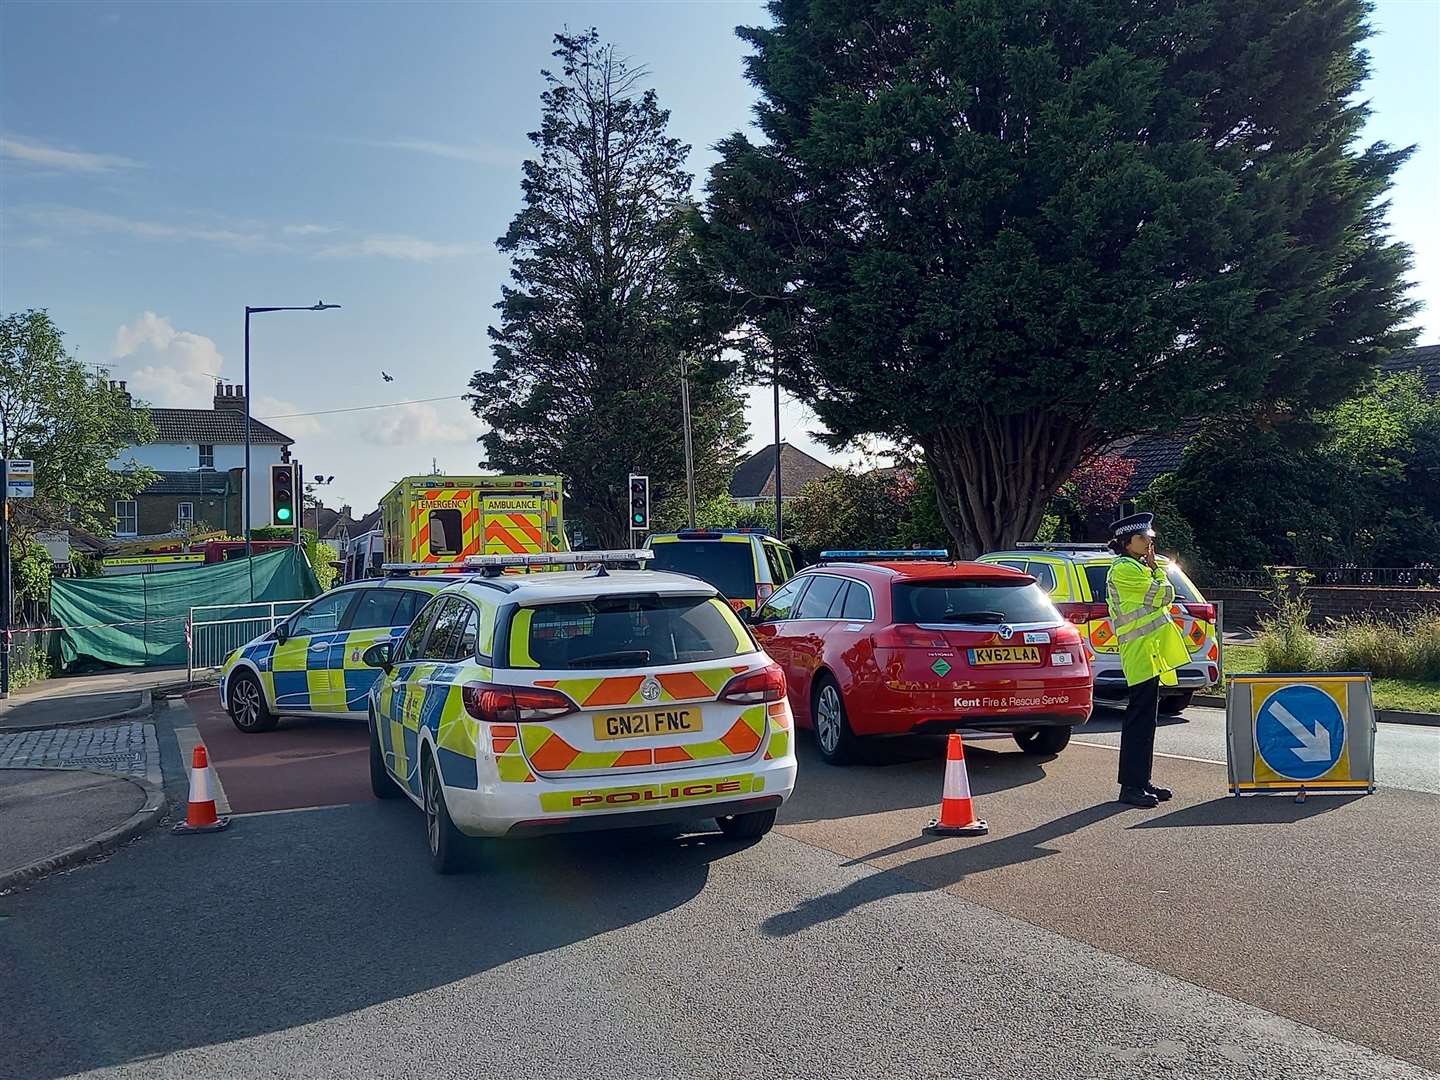 Emergency crews at the scene in Borstal Hill after the incident in August